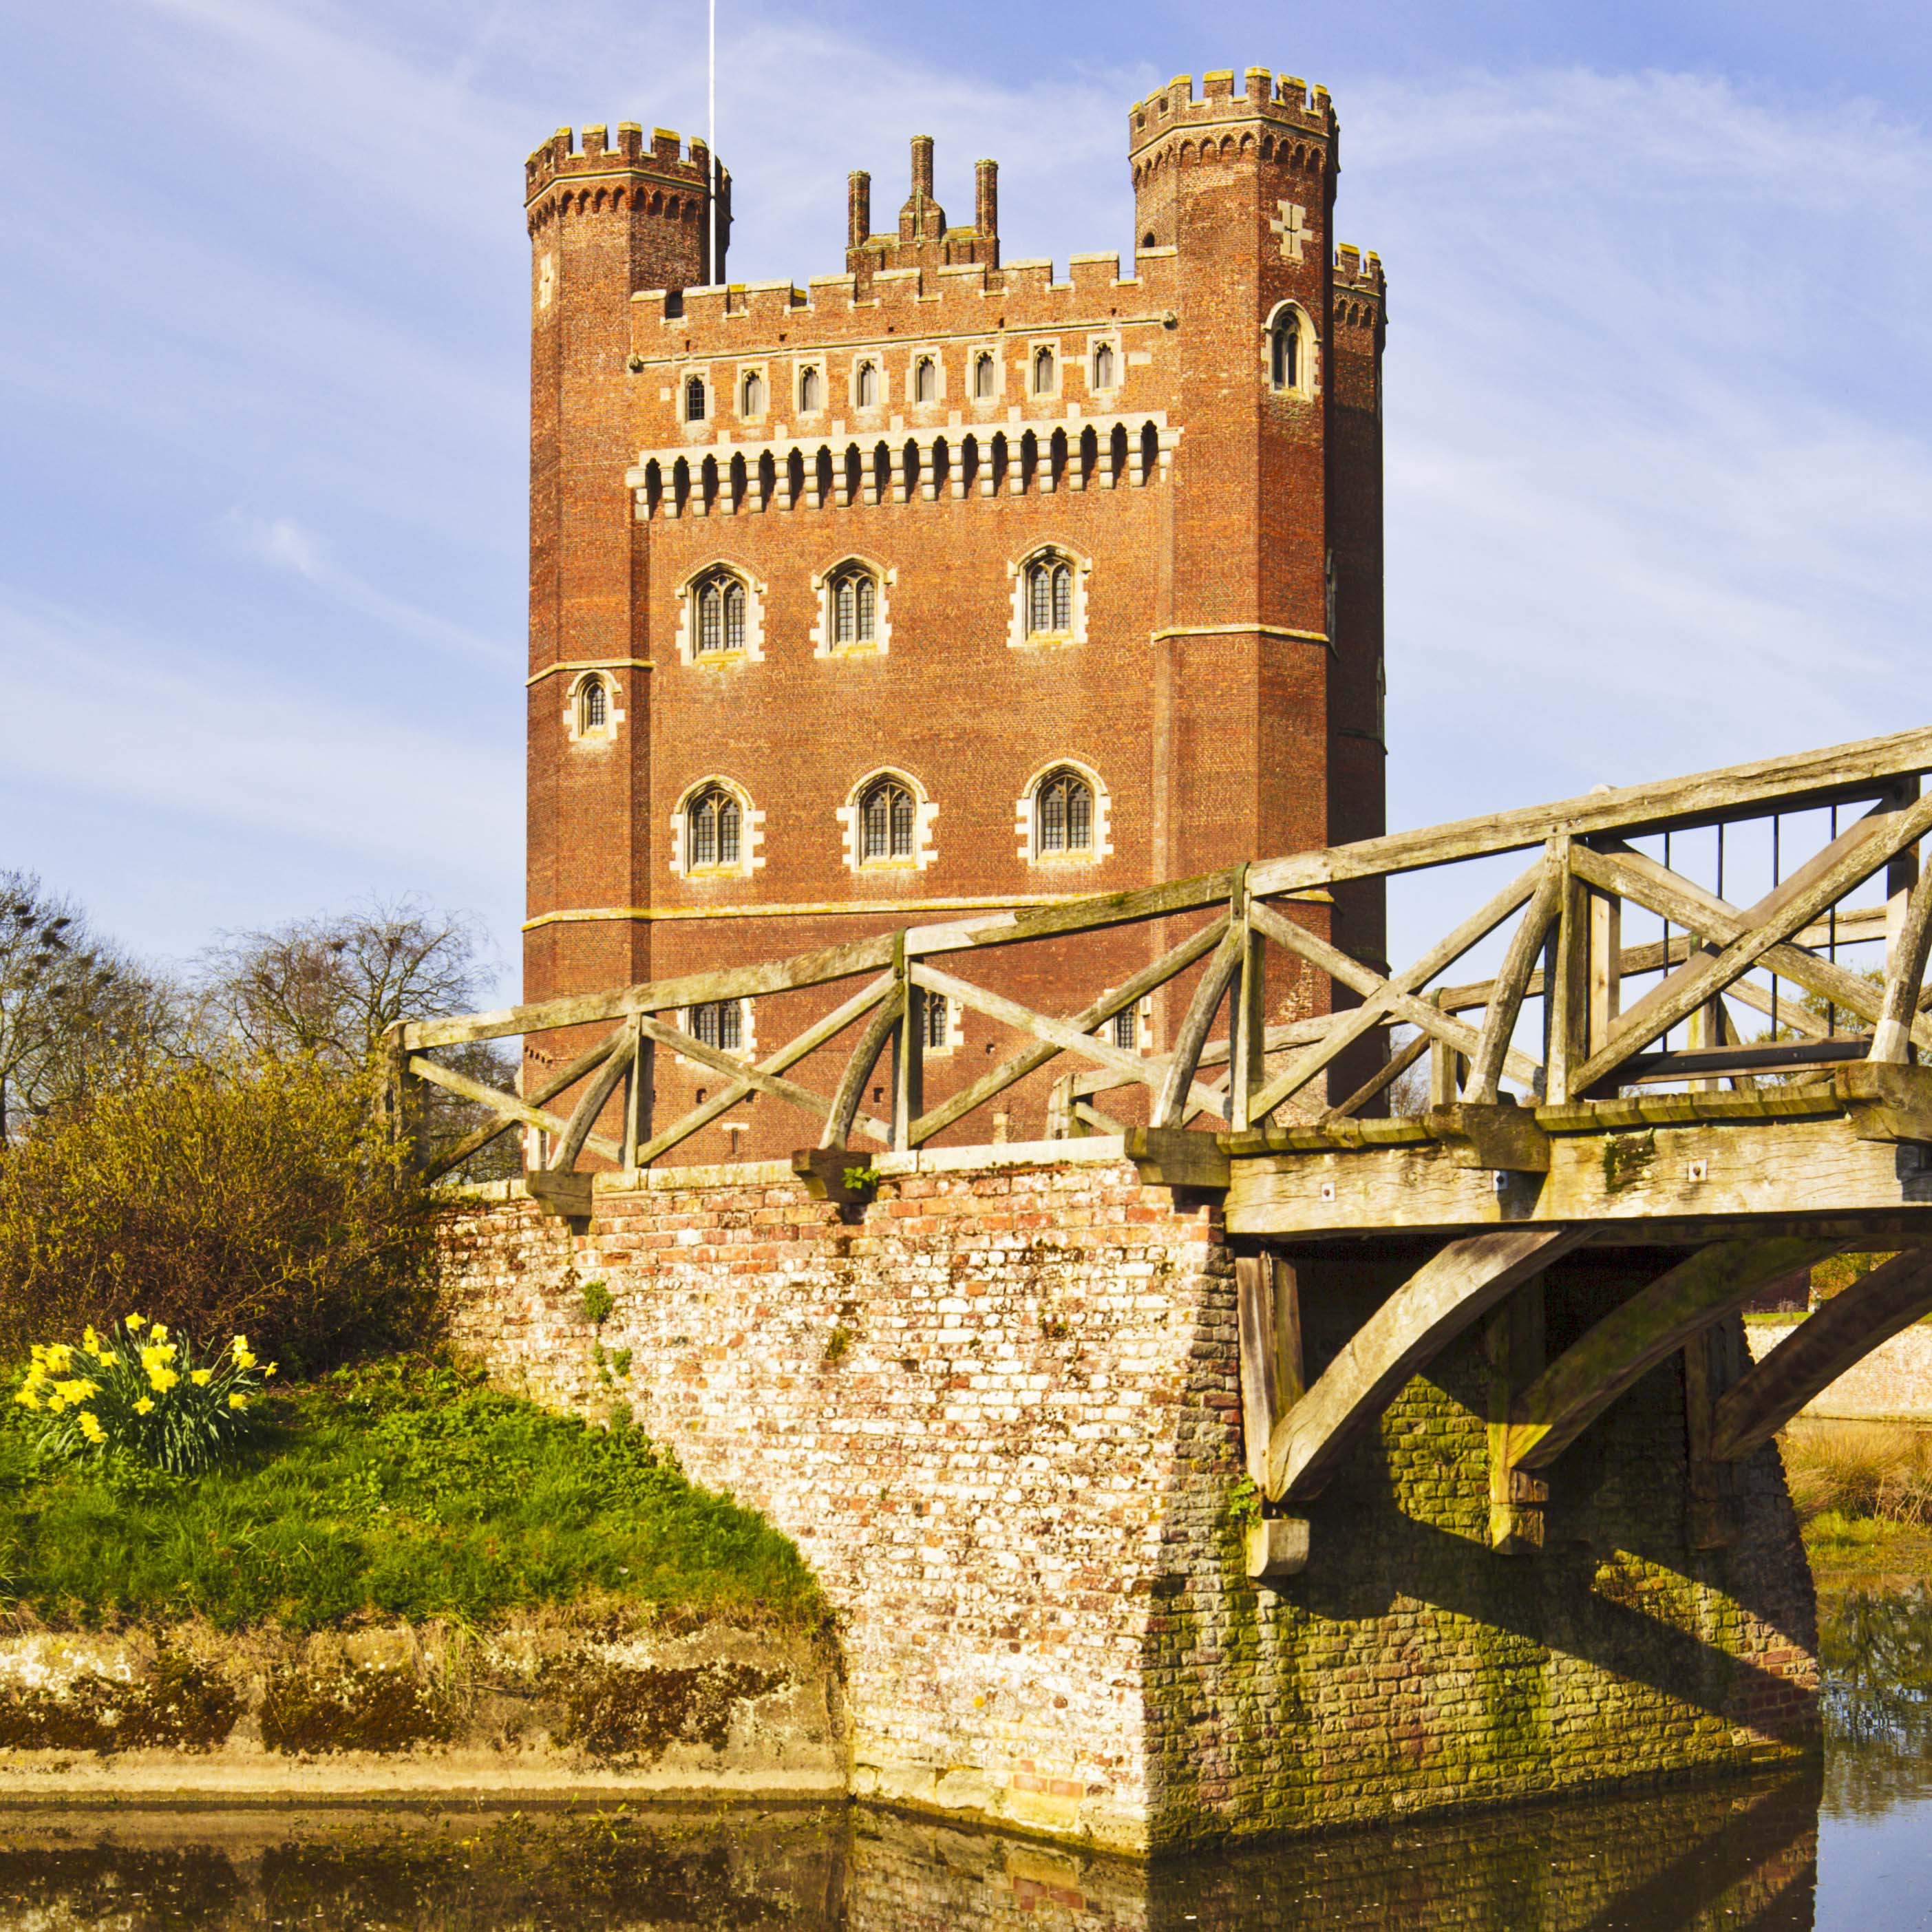 The east front of the Great Tower of Tattershall Castle